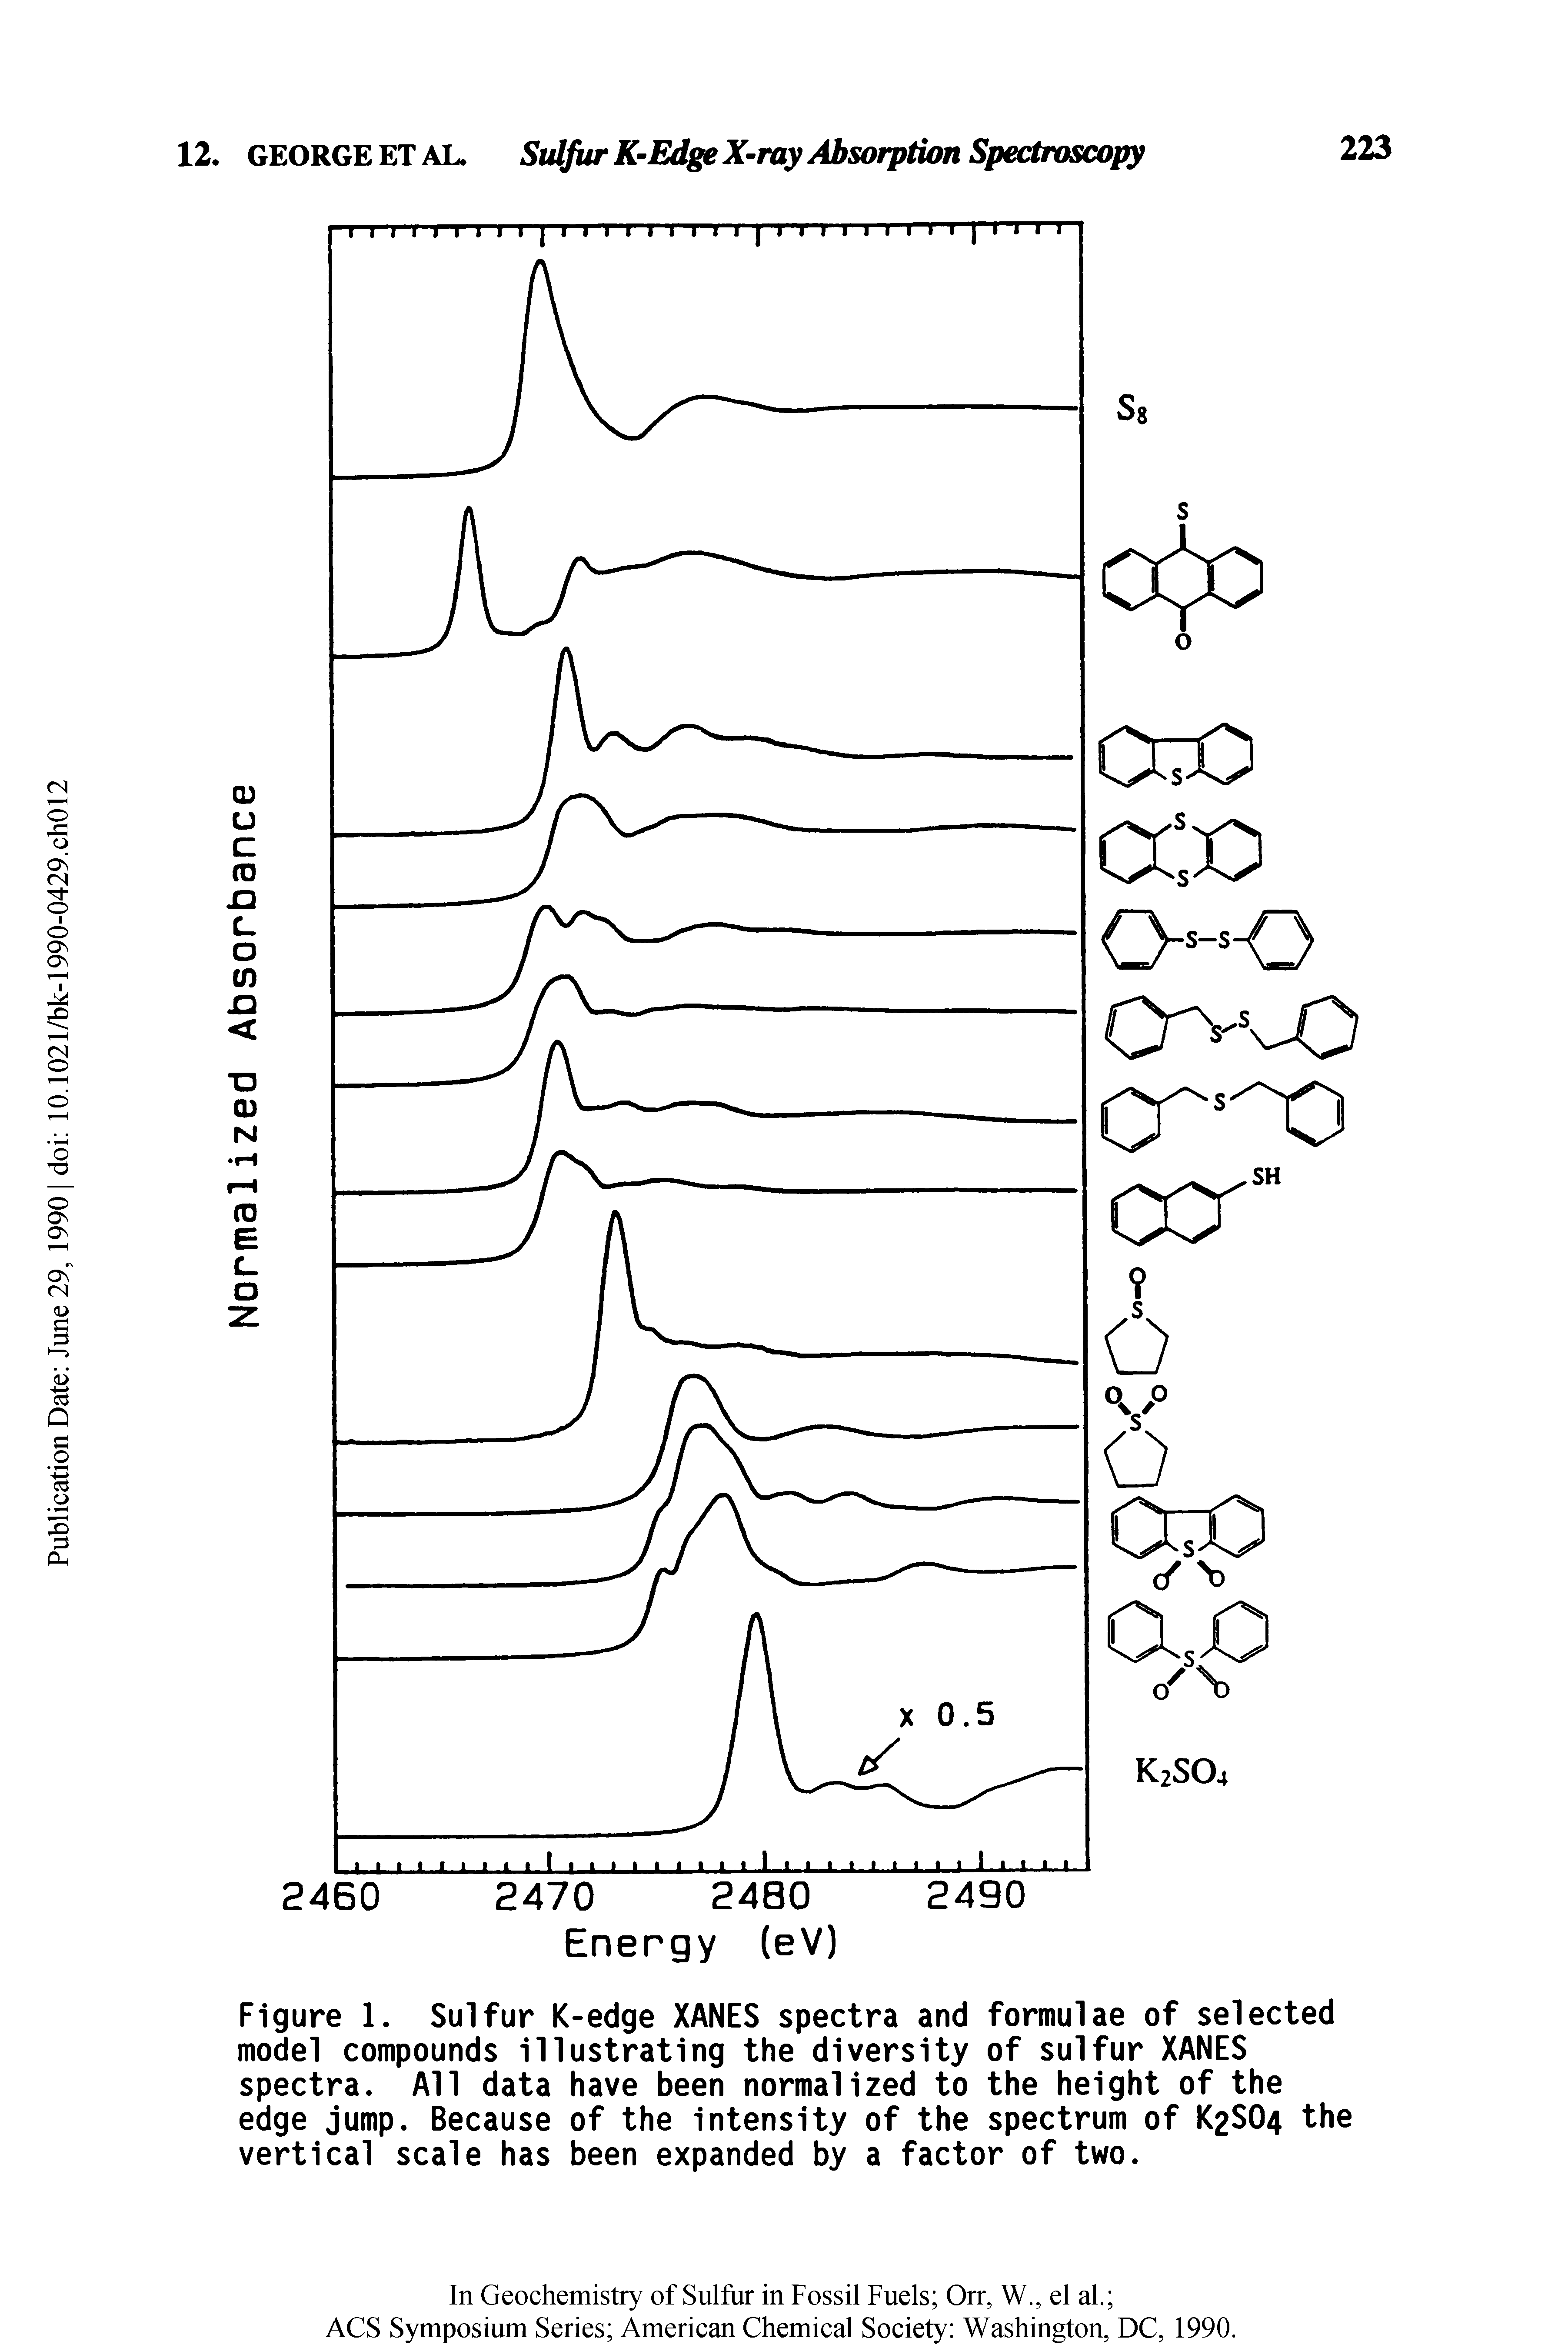 Figure 1. Sulfur K-edge XANES spectra and formulae of selected model compounds illustrating the diversity of sulfur XANES spectra. All data have been normalized to the height of the edge jump. Because of the intensity of the spectrum of K2SO4 the vertical scale has been expanded by a factor of two.